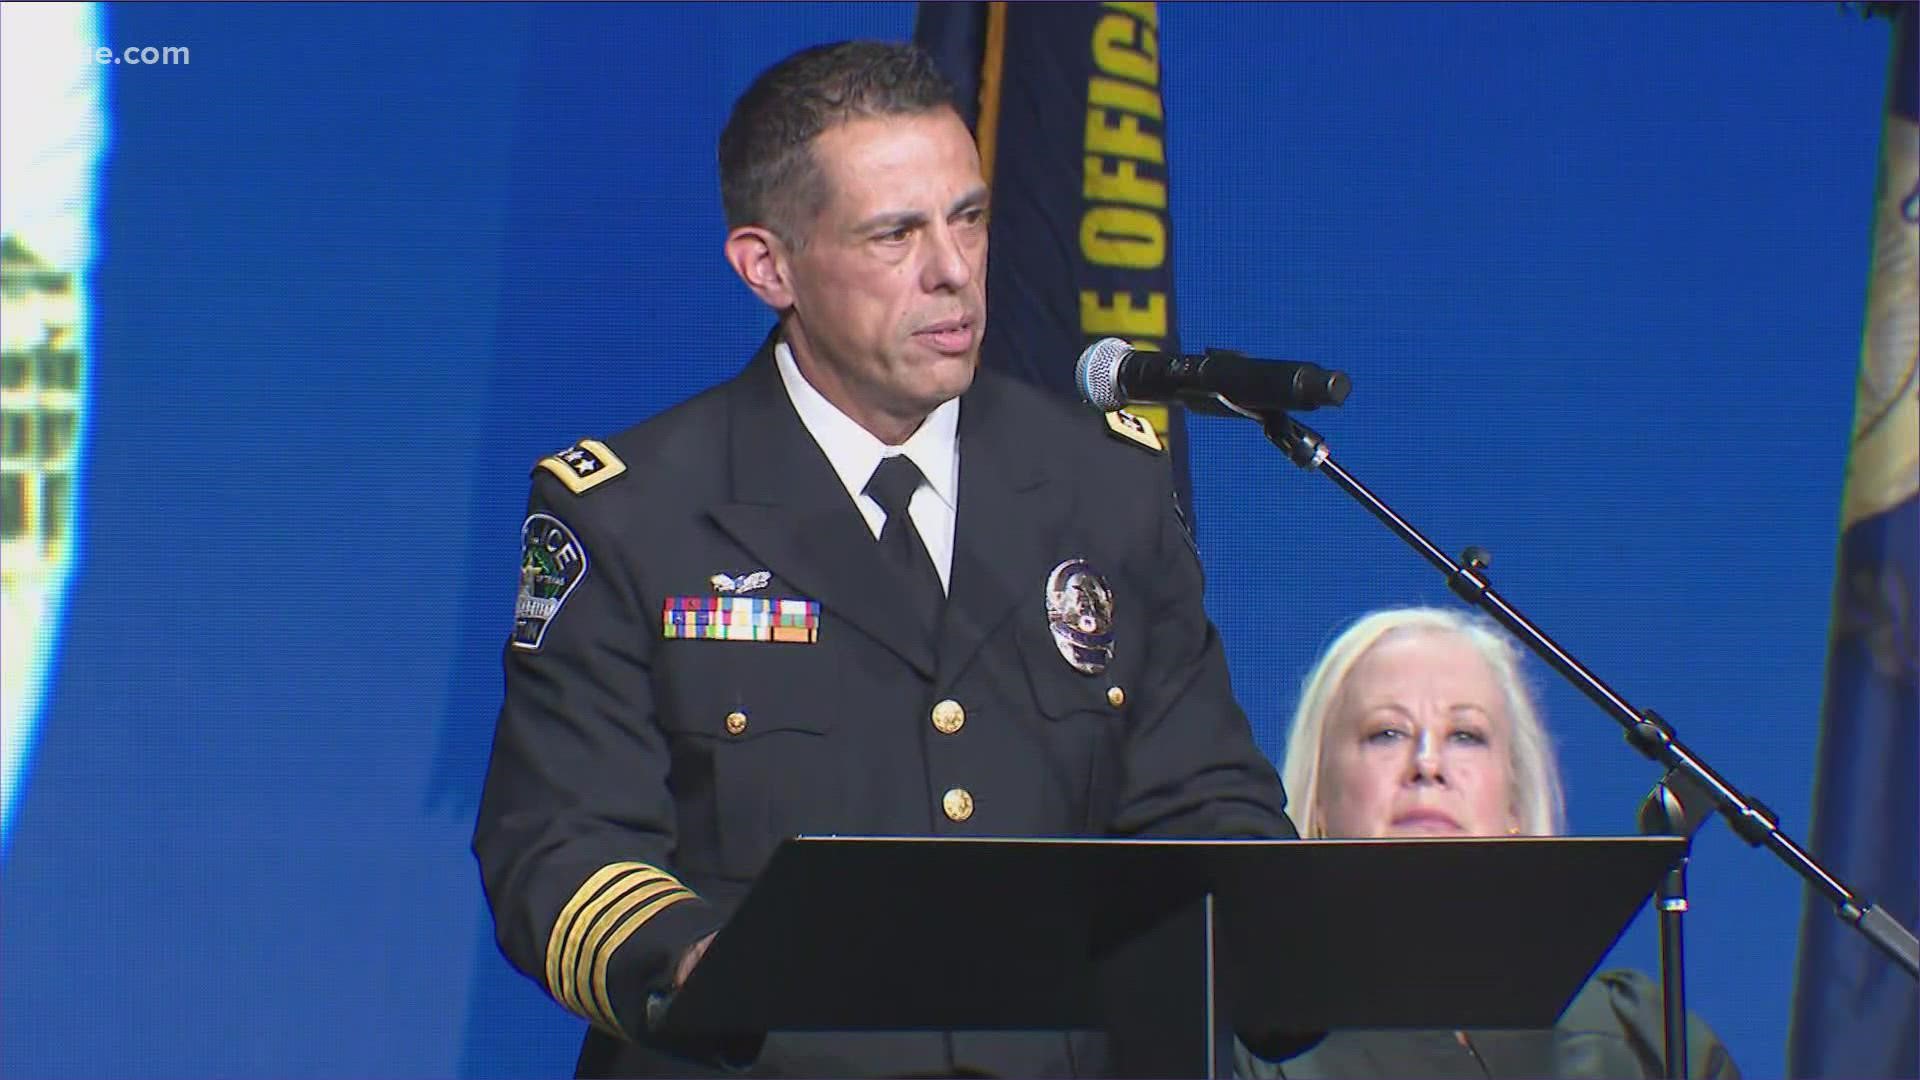 Chacon has served as APD's interim chief since March.